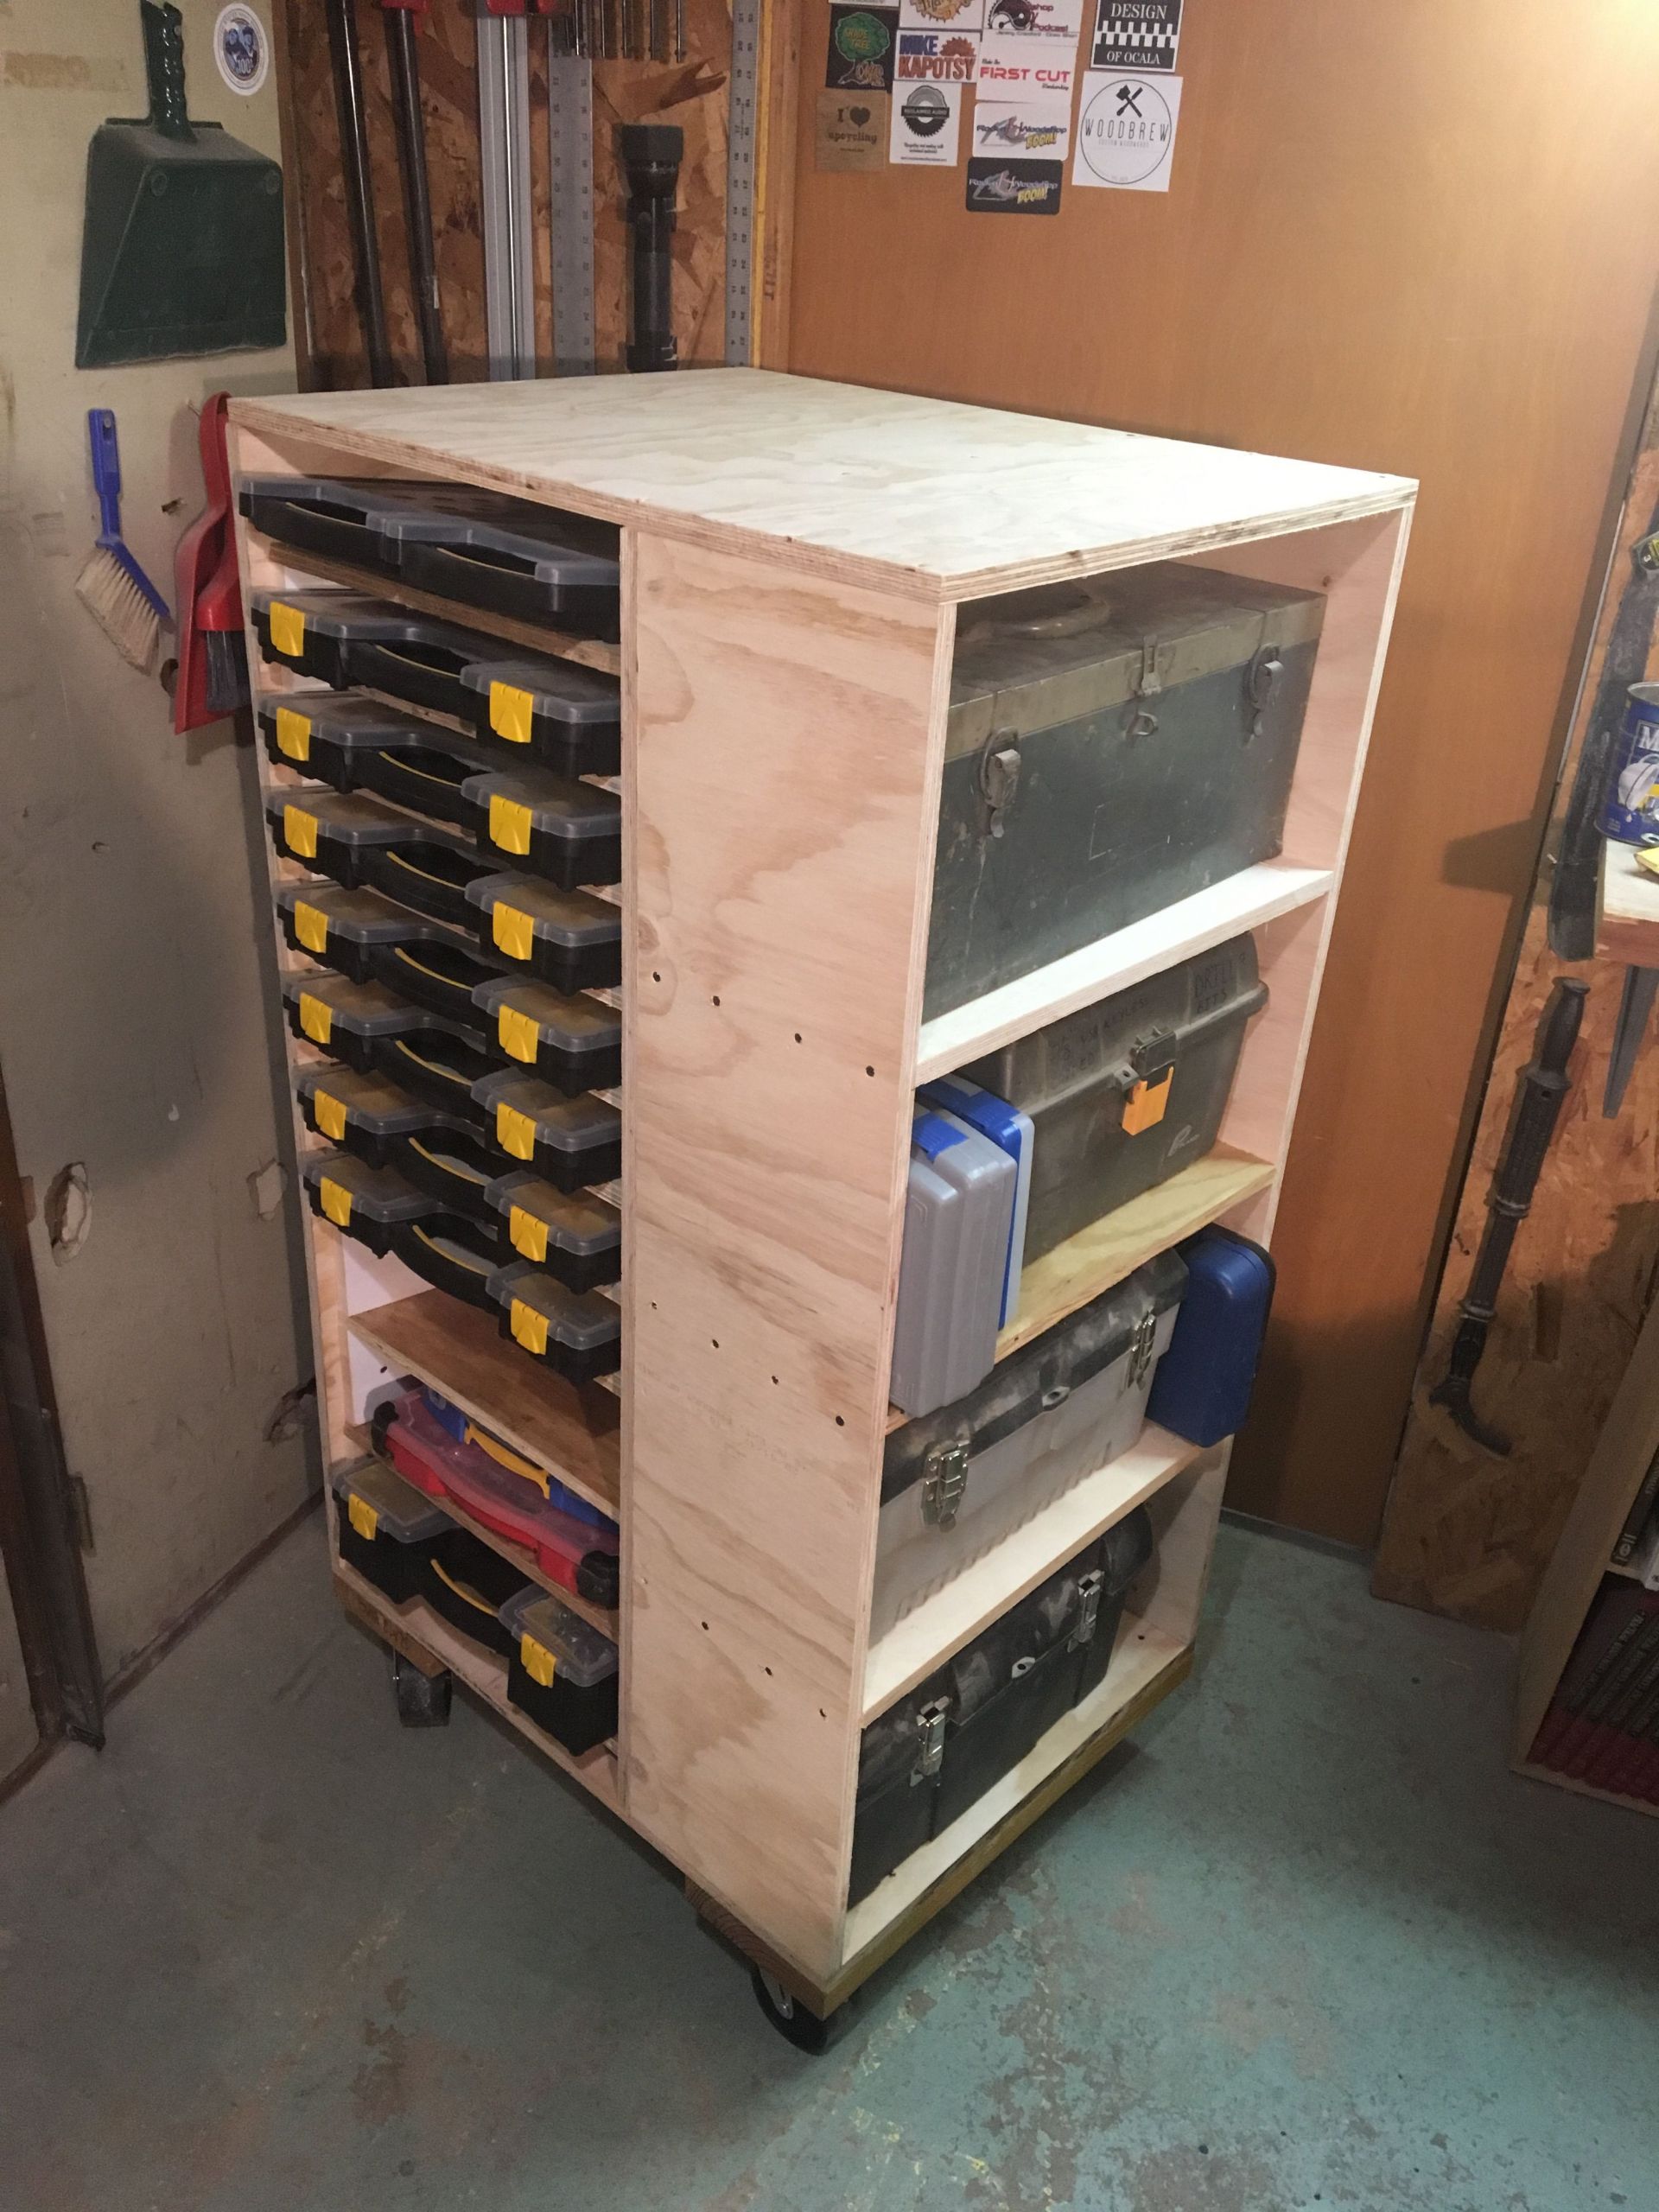 Harbor Freight Garage Organizer
 I made this screw organizer tool box holder for in my shop